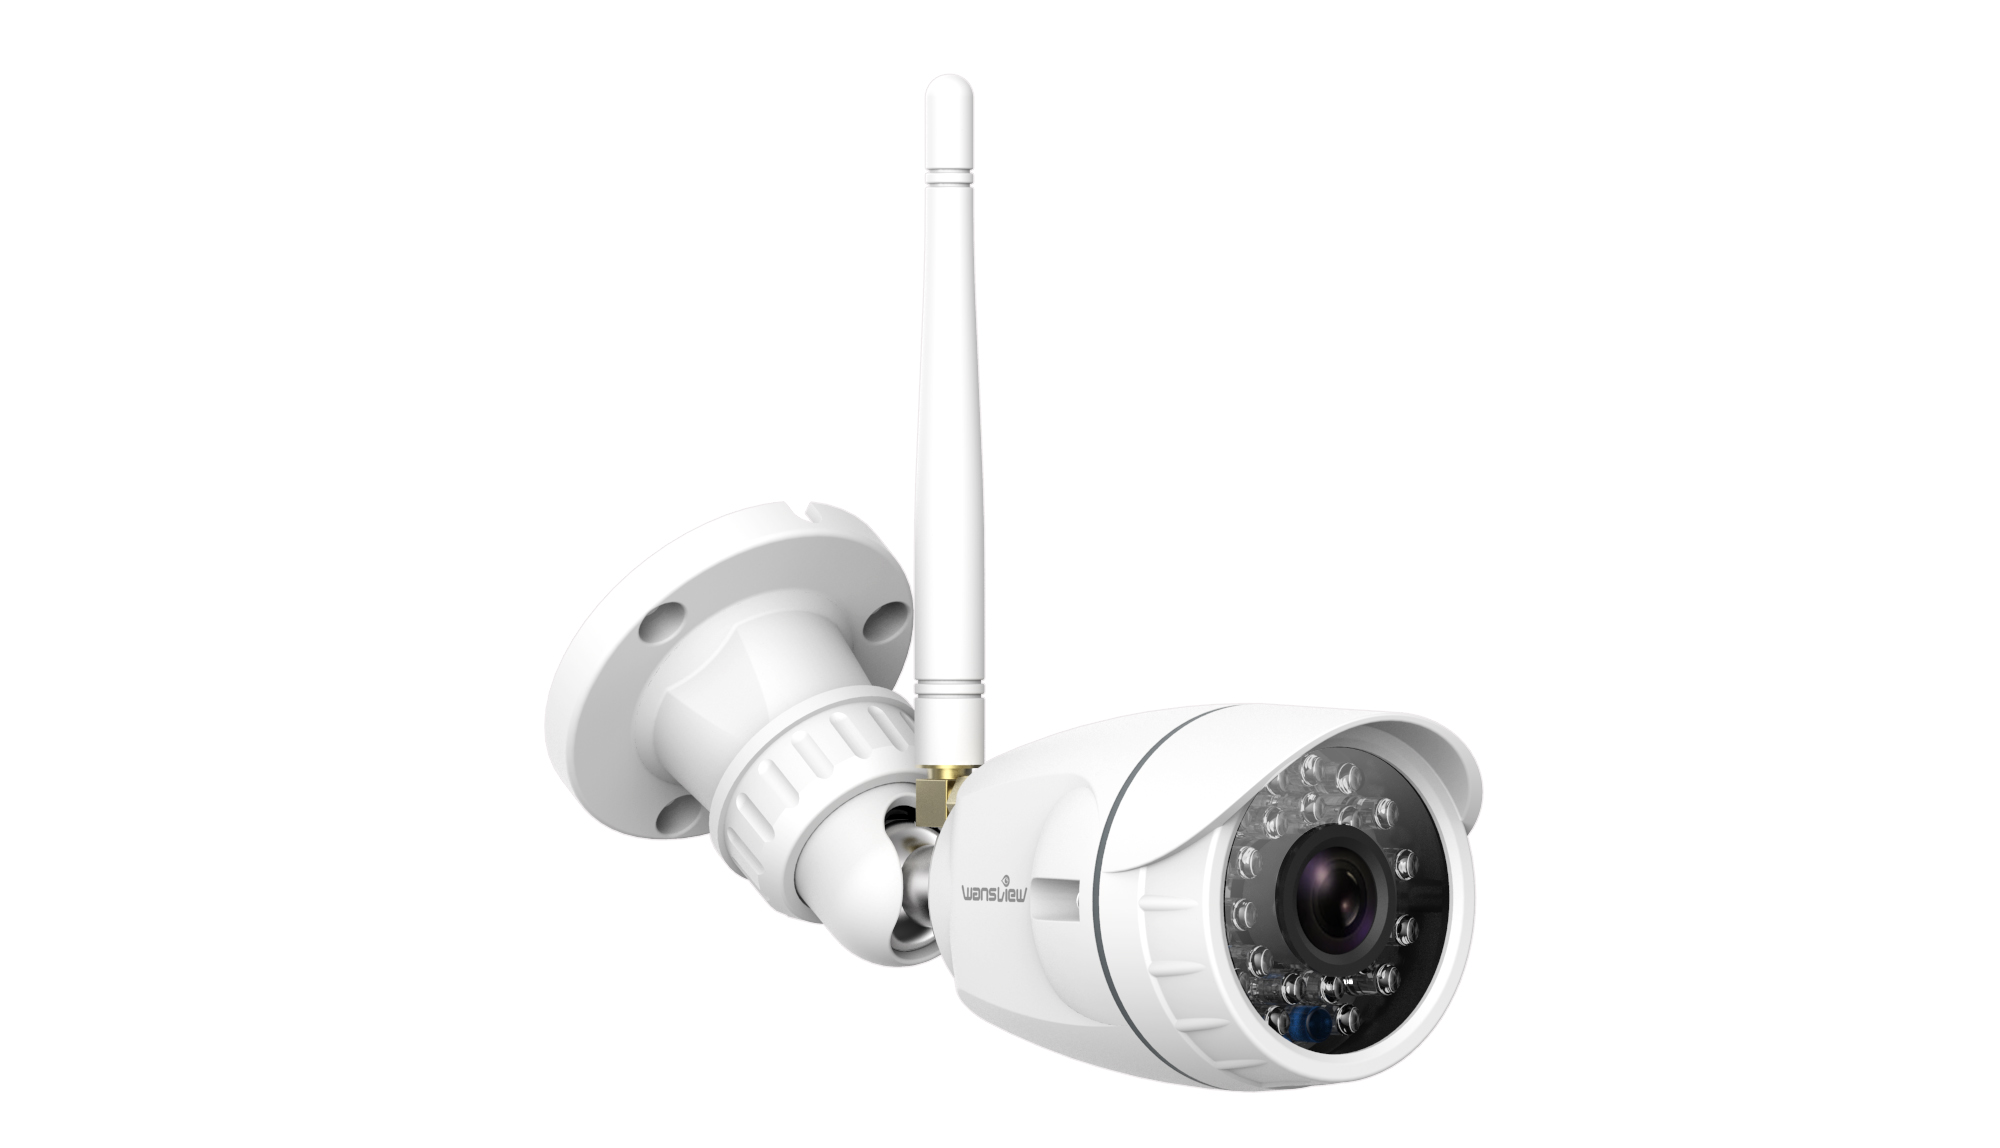 How to replace the network of surveillance cameras